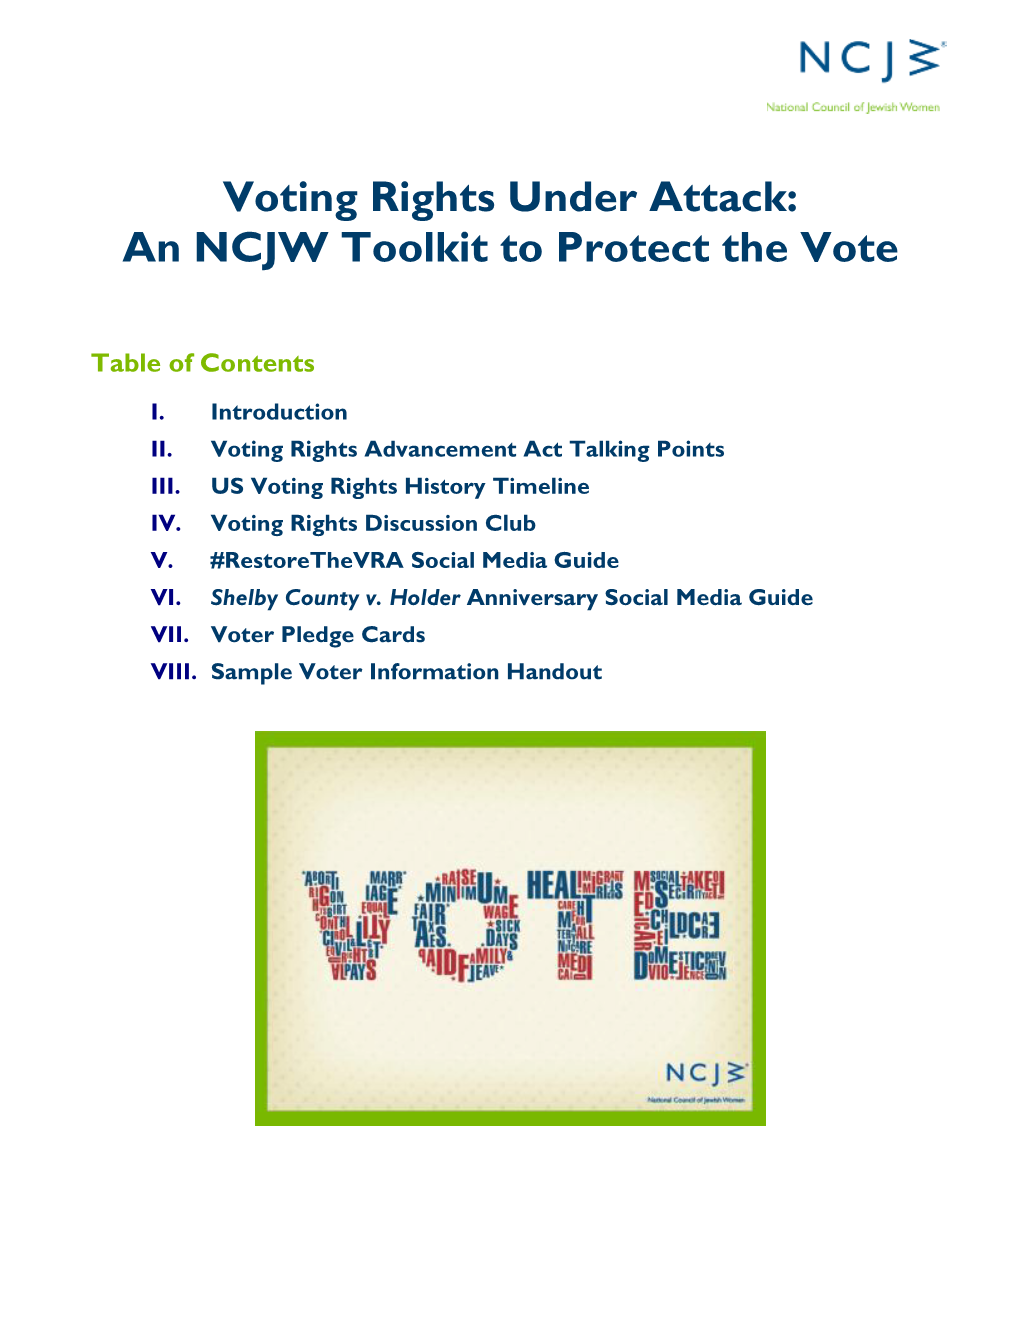 Voting Rights Under Attack: an NCJW Toolkit to Protect the Vote